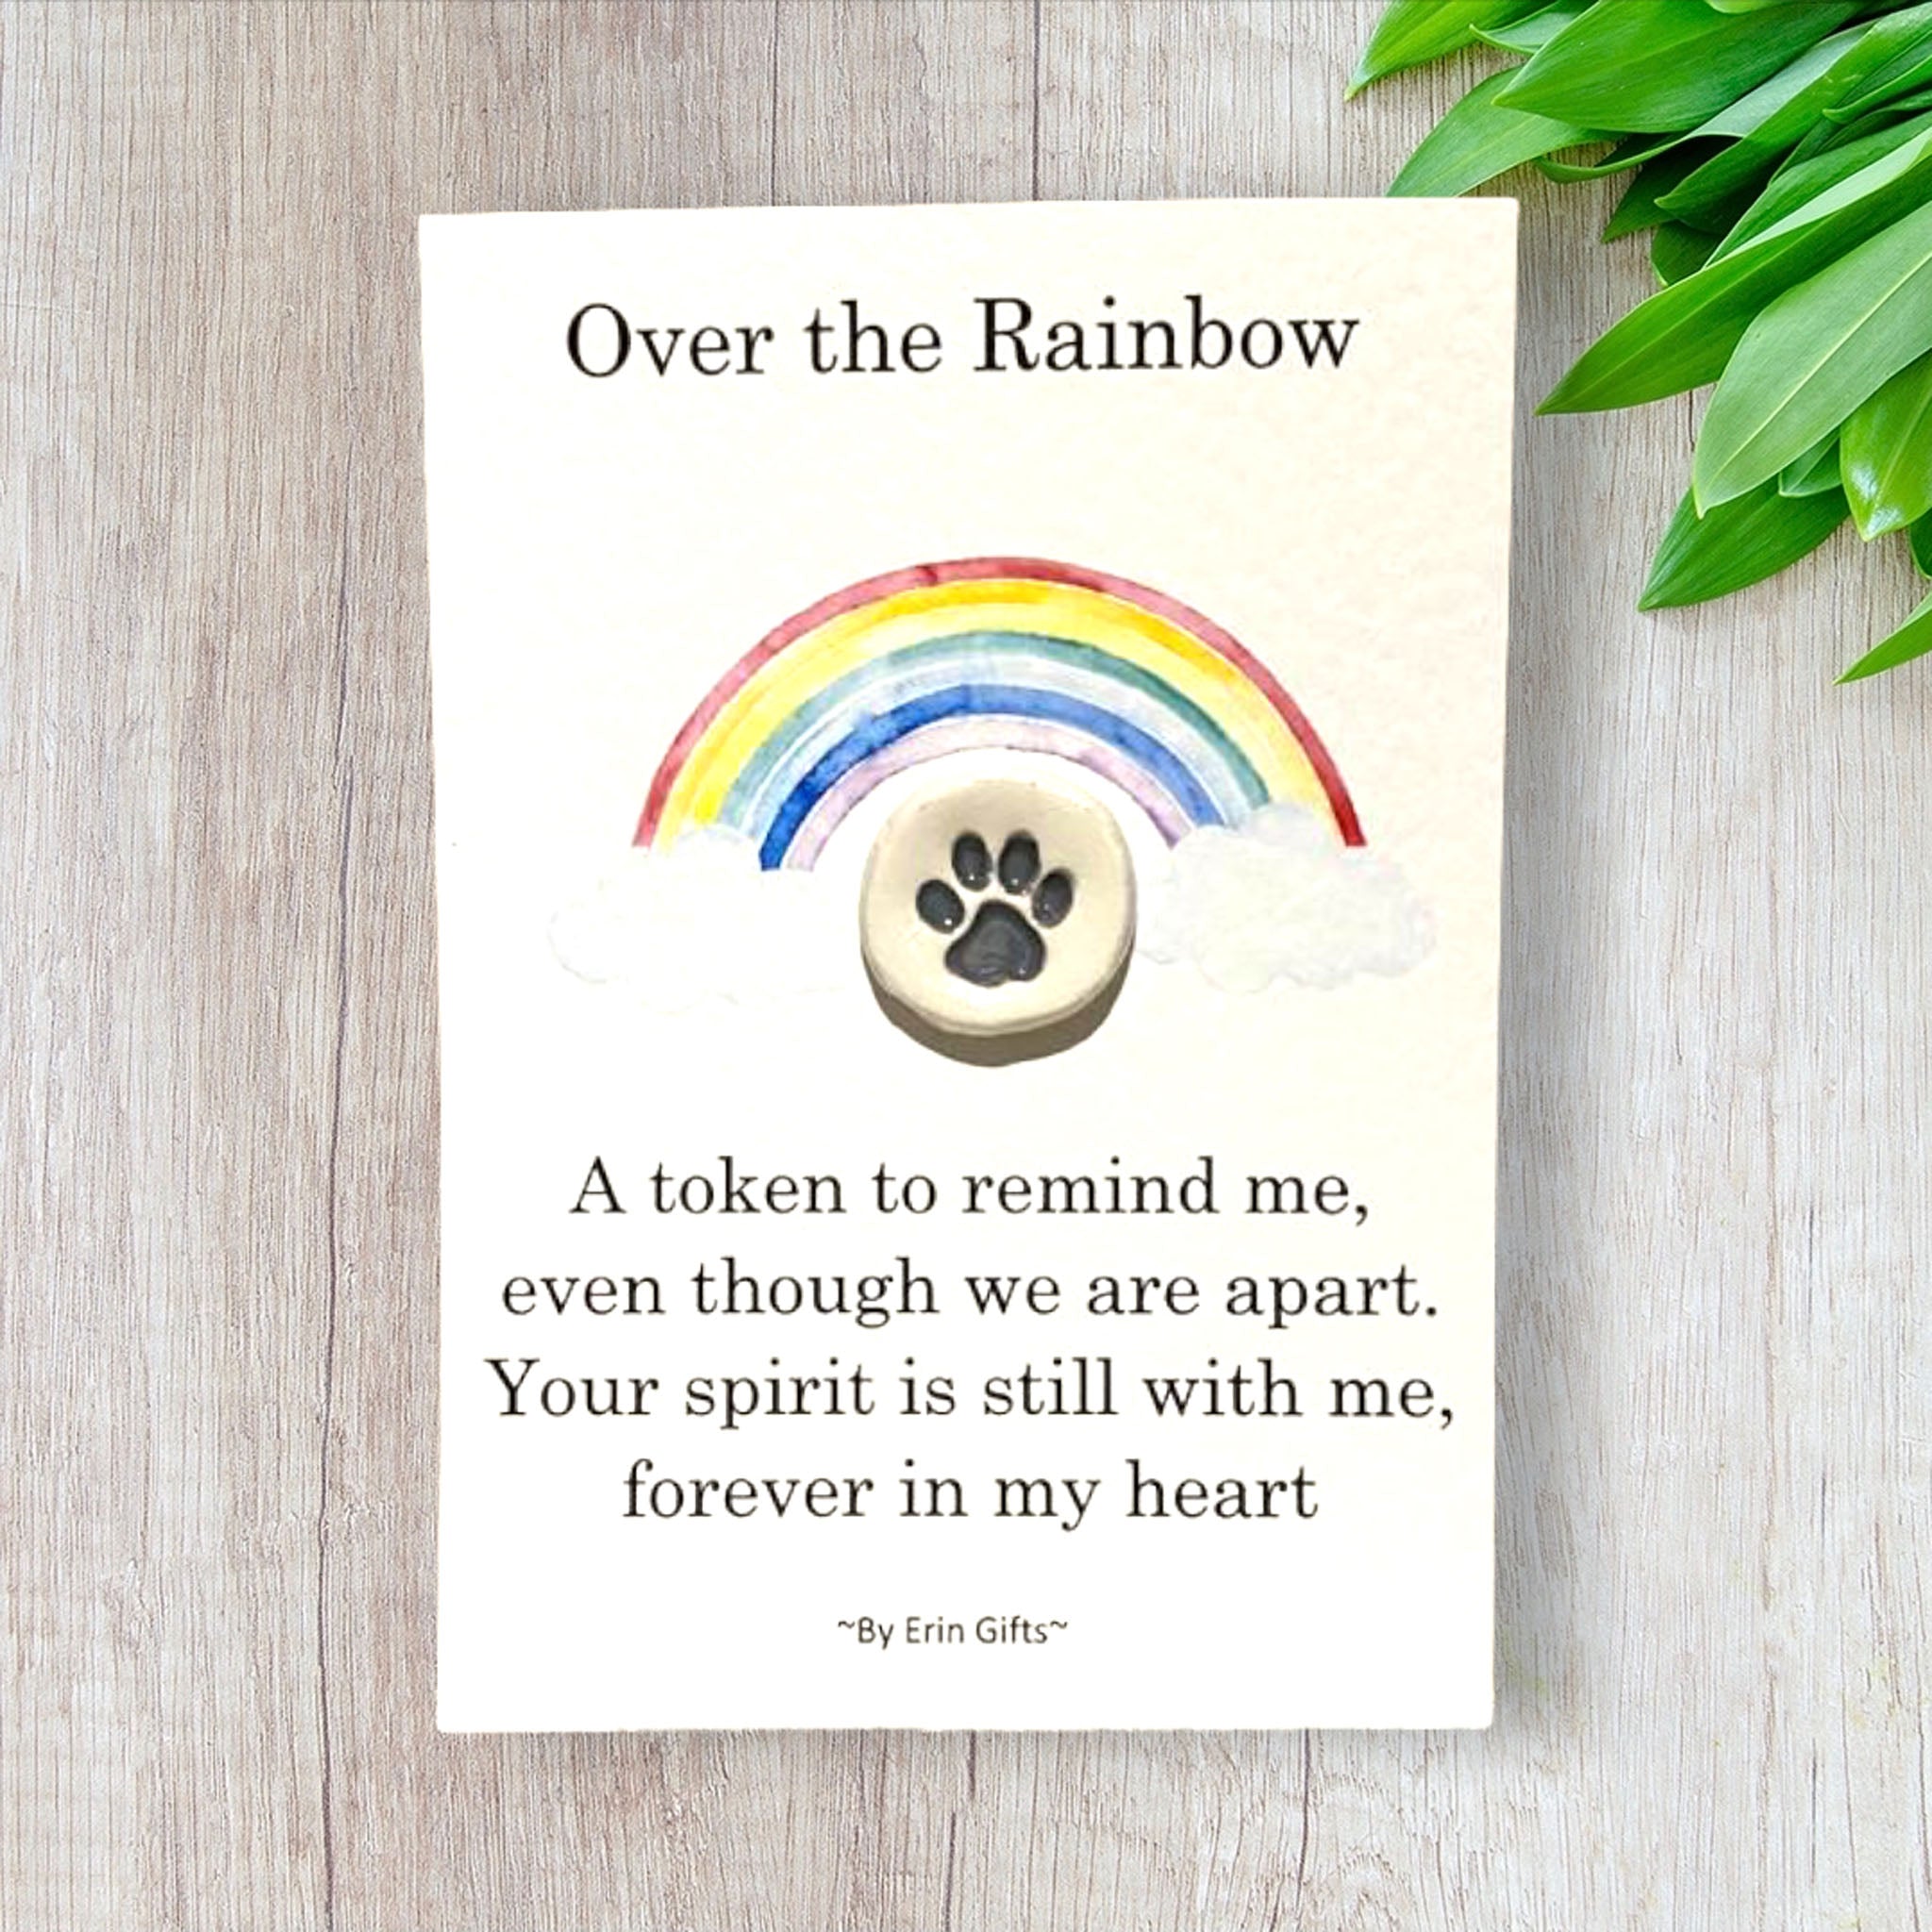 Over the Rainbow  Ceramic Wish Token and Card